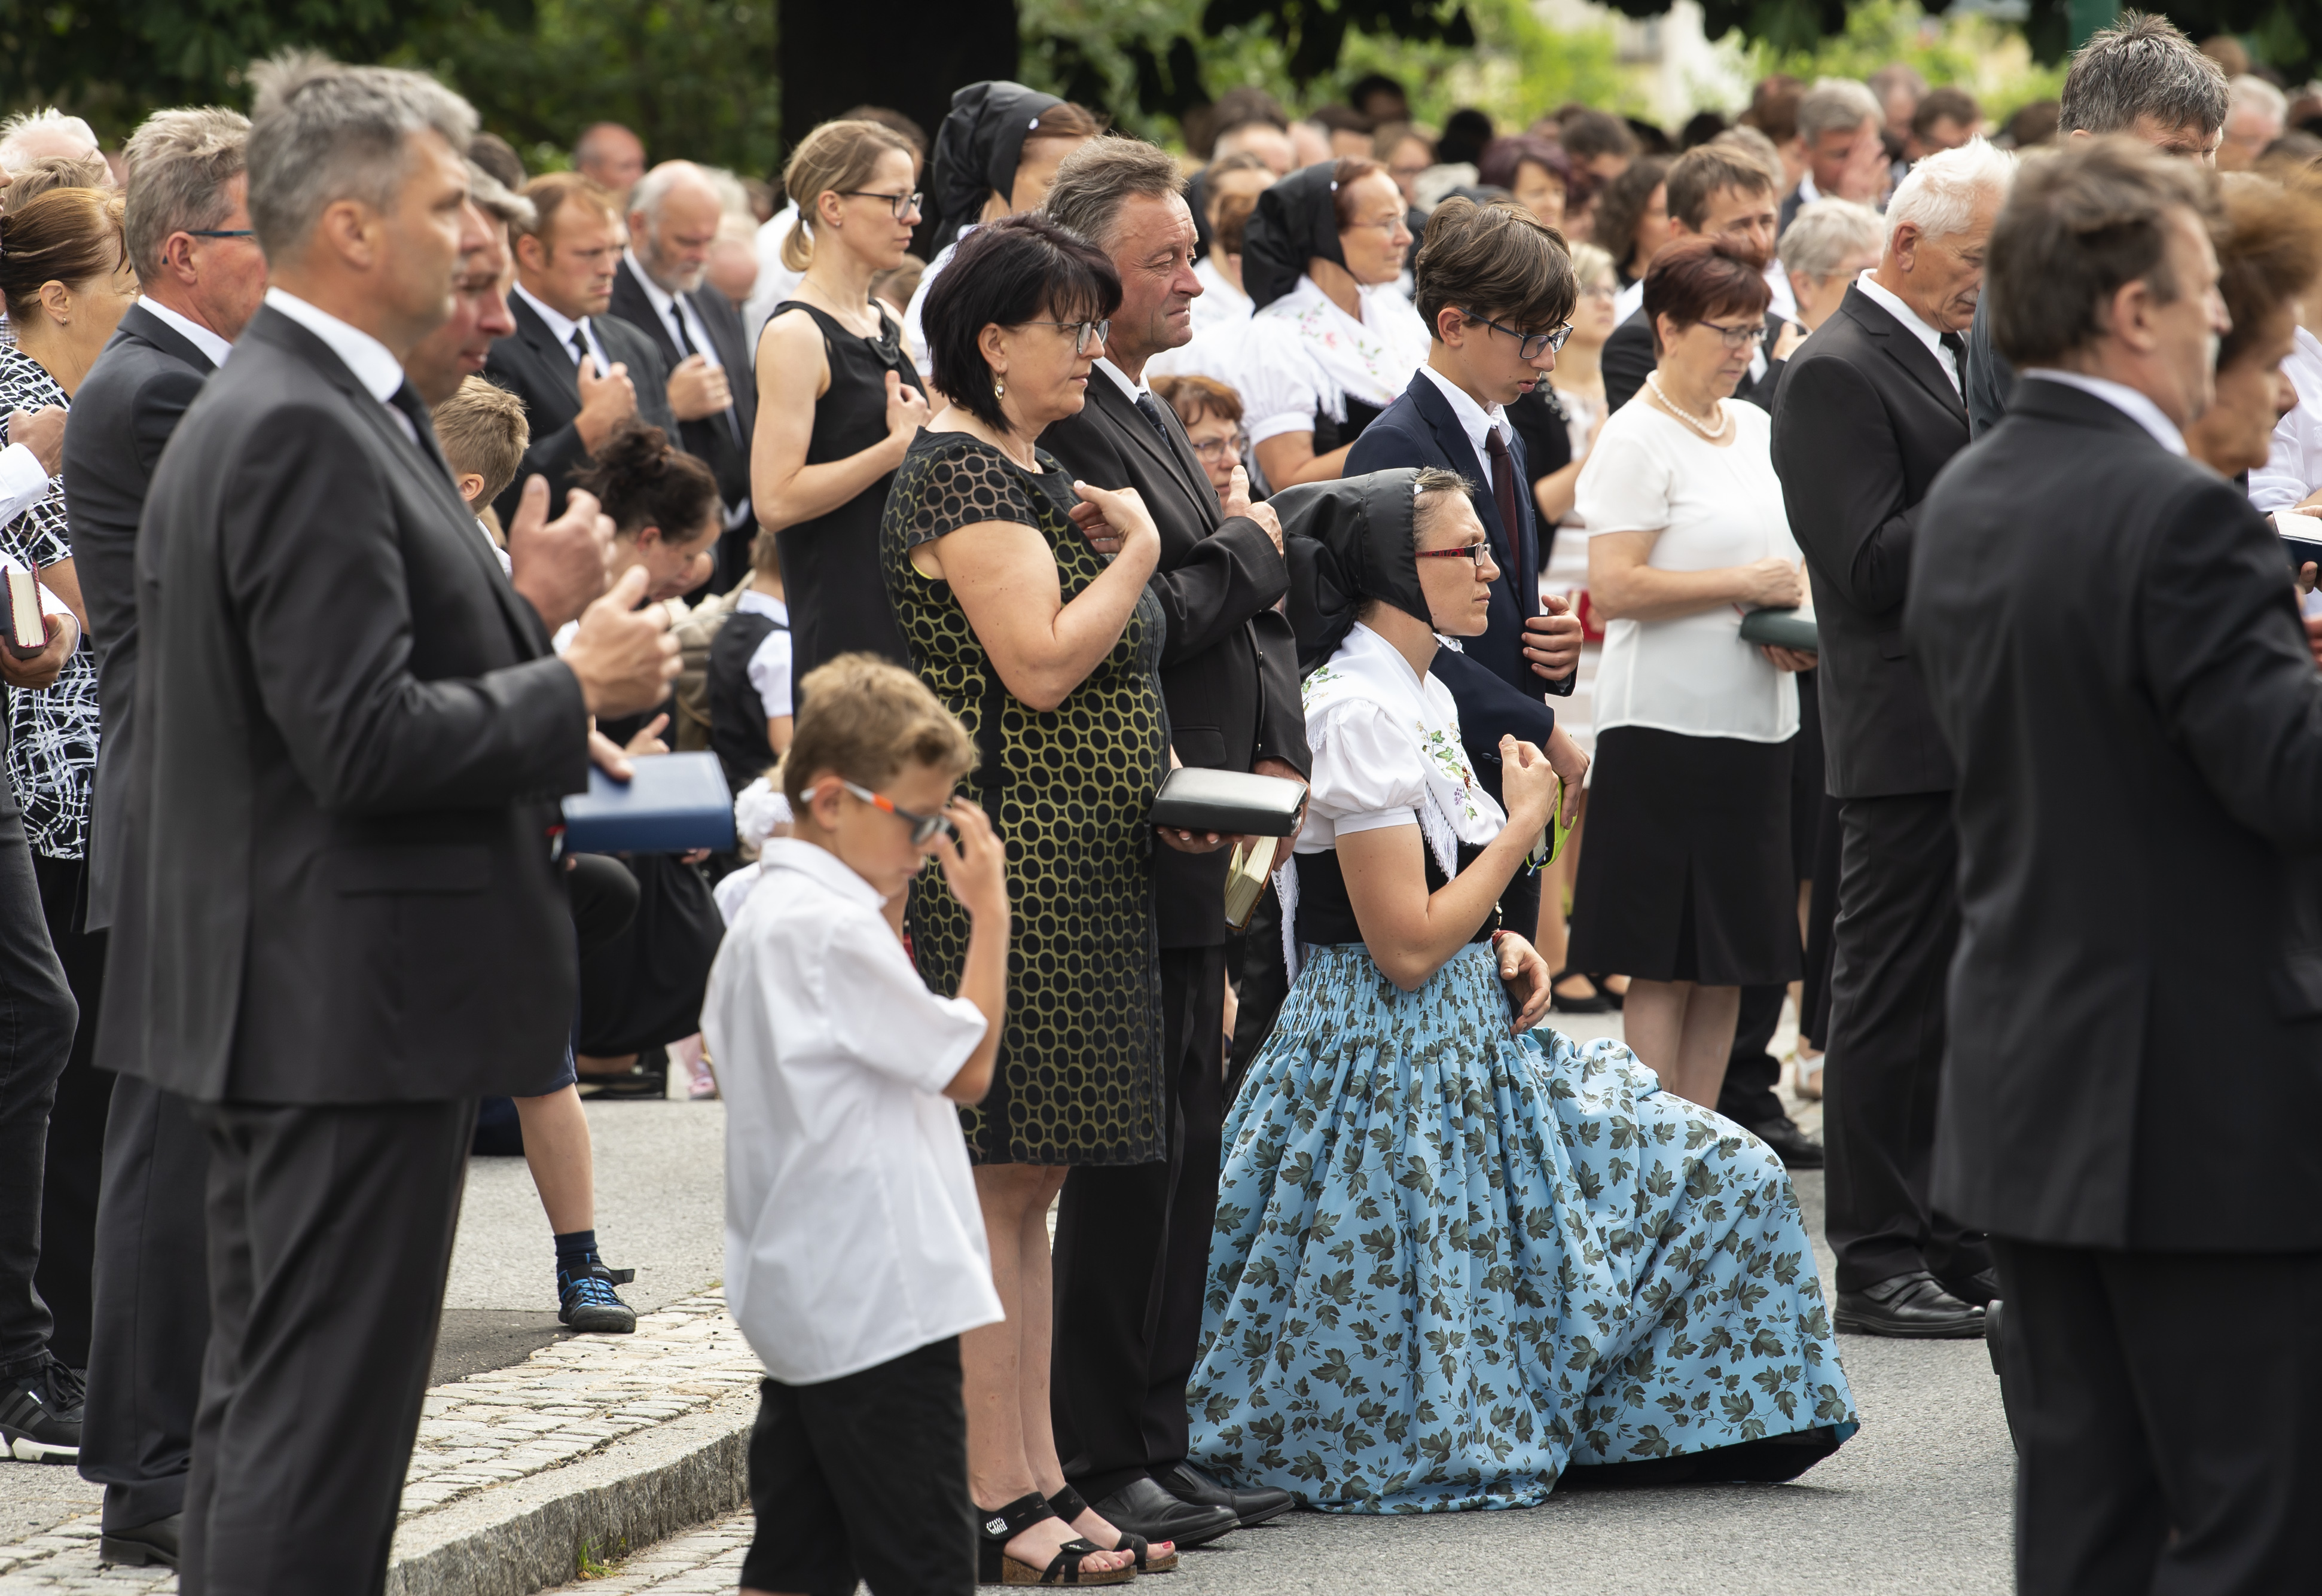 People dressed in the traditional clothes cross themselves during a Corpus Christi procession in Crostwitz, Germany, Thursday, June 20, 2019. The catholic faithful Sorbs are acknowledged as a national minority near the German-Polish border with their own language in eastern Germany. The procession to commemorate the solemnity of the body and blood of Christ has been a tradition in Lusatia (Lausitz) region. (AP Photo/Jens Meyer)